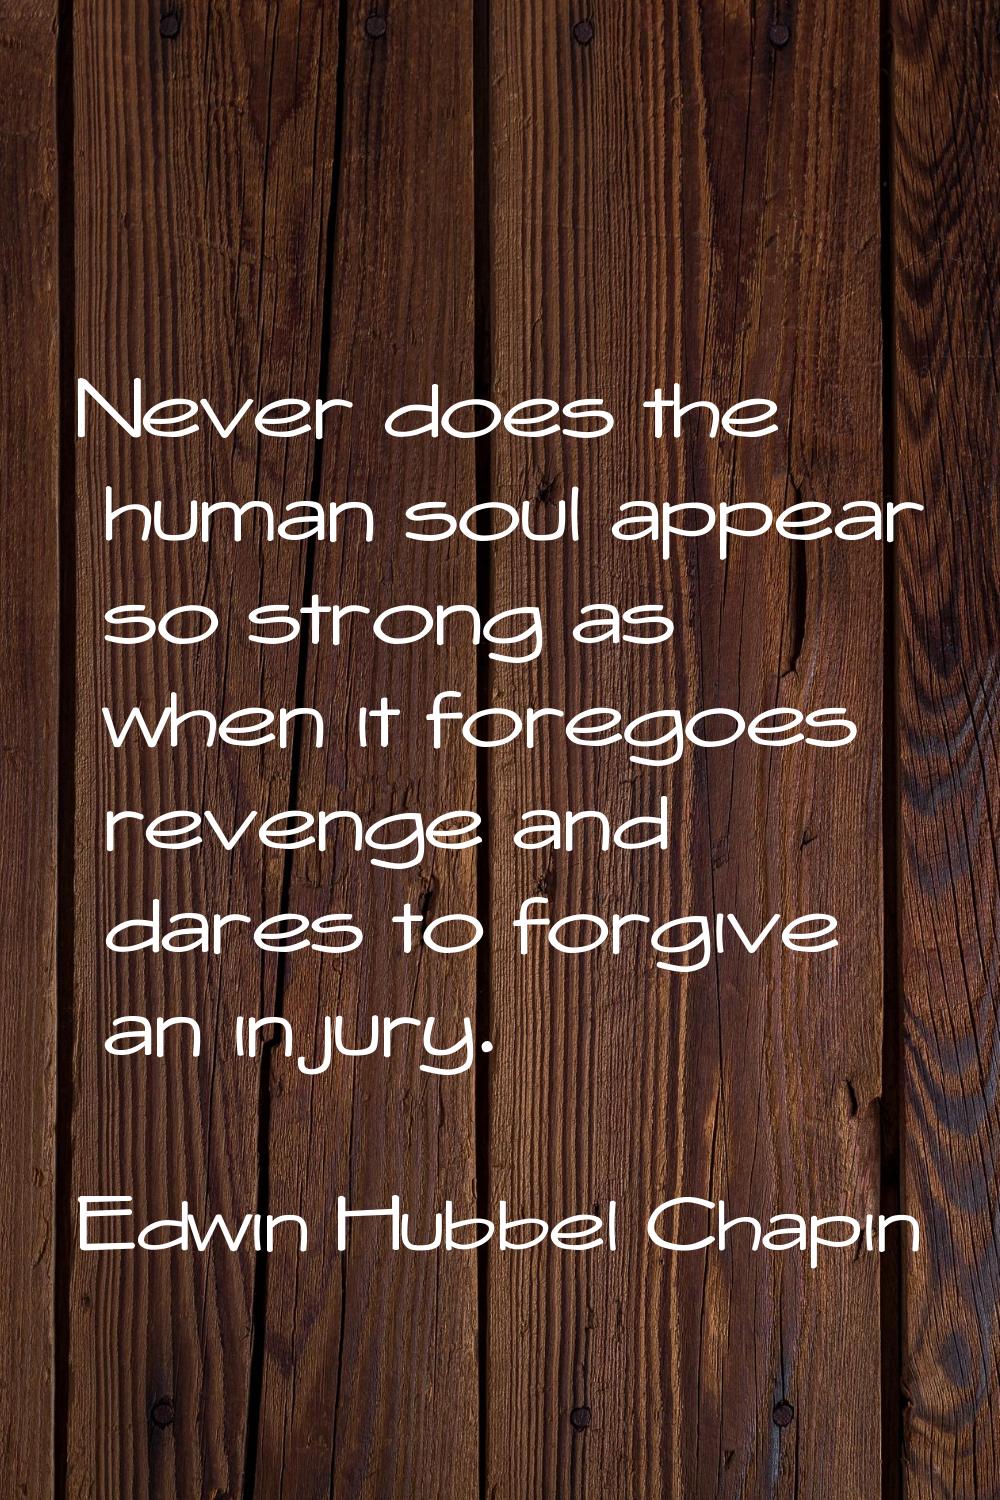 Never does the human soul appear so strong as when it foregoes revenge and dares to forgive an inju